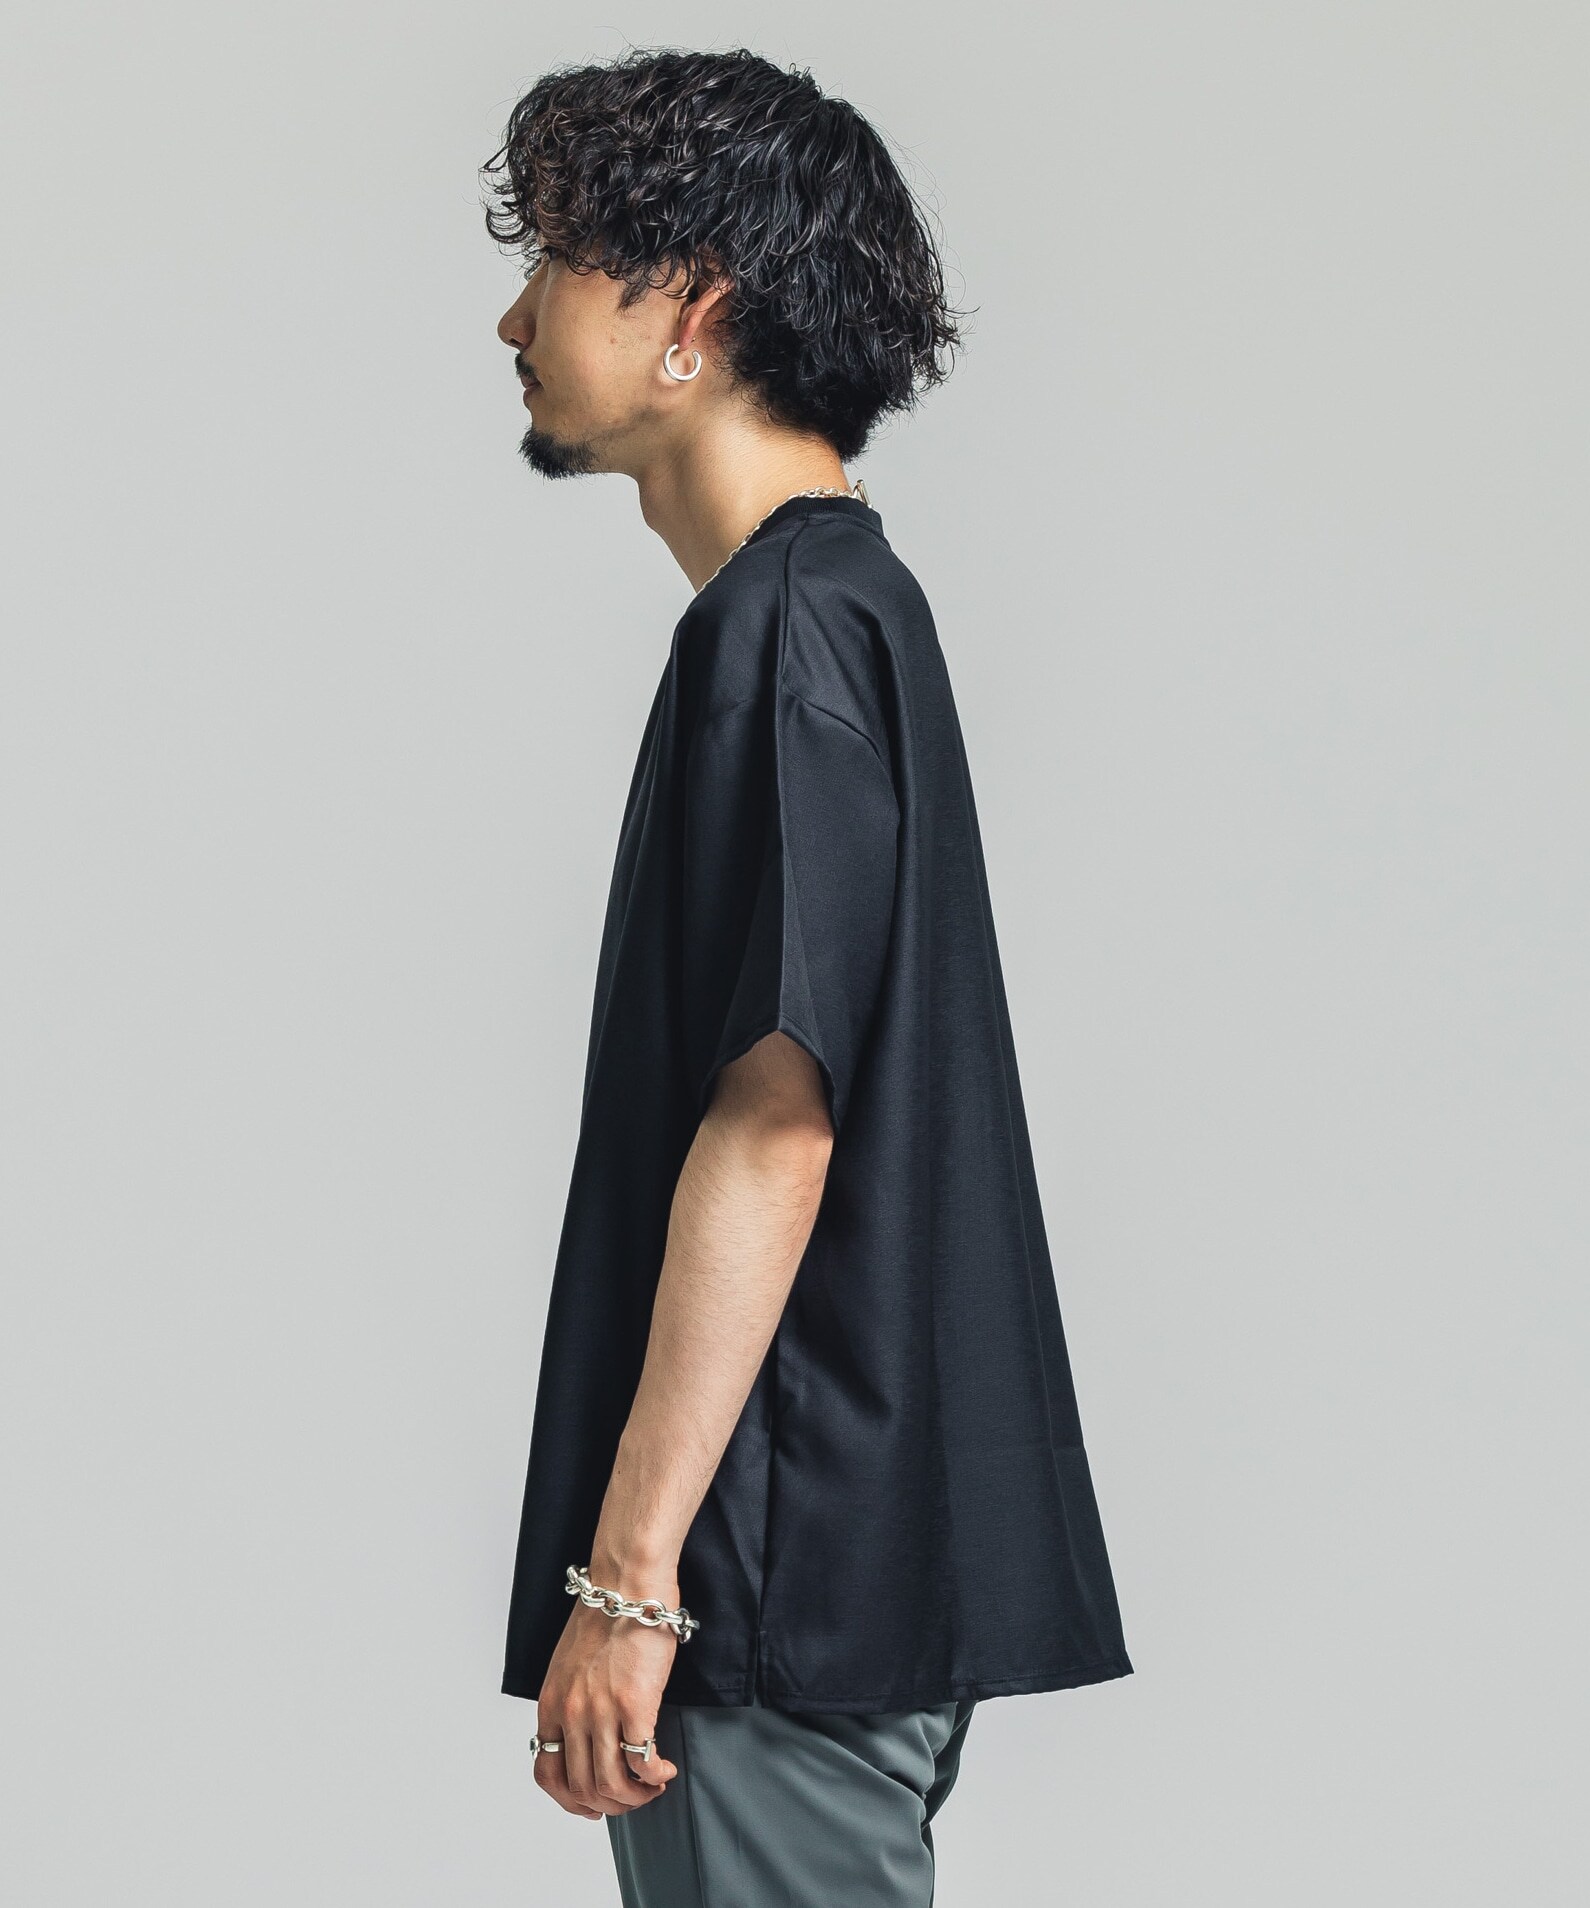 DRY SYSTEM S/S PULLOVER TEE BESPOKE TOKYO